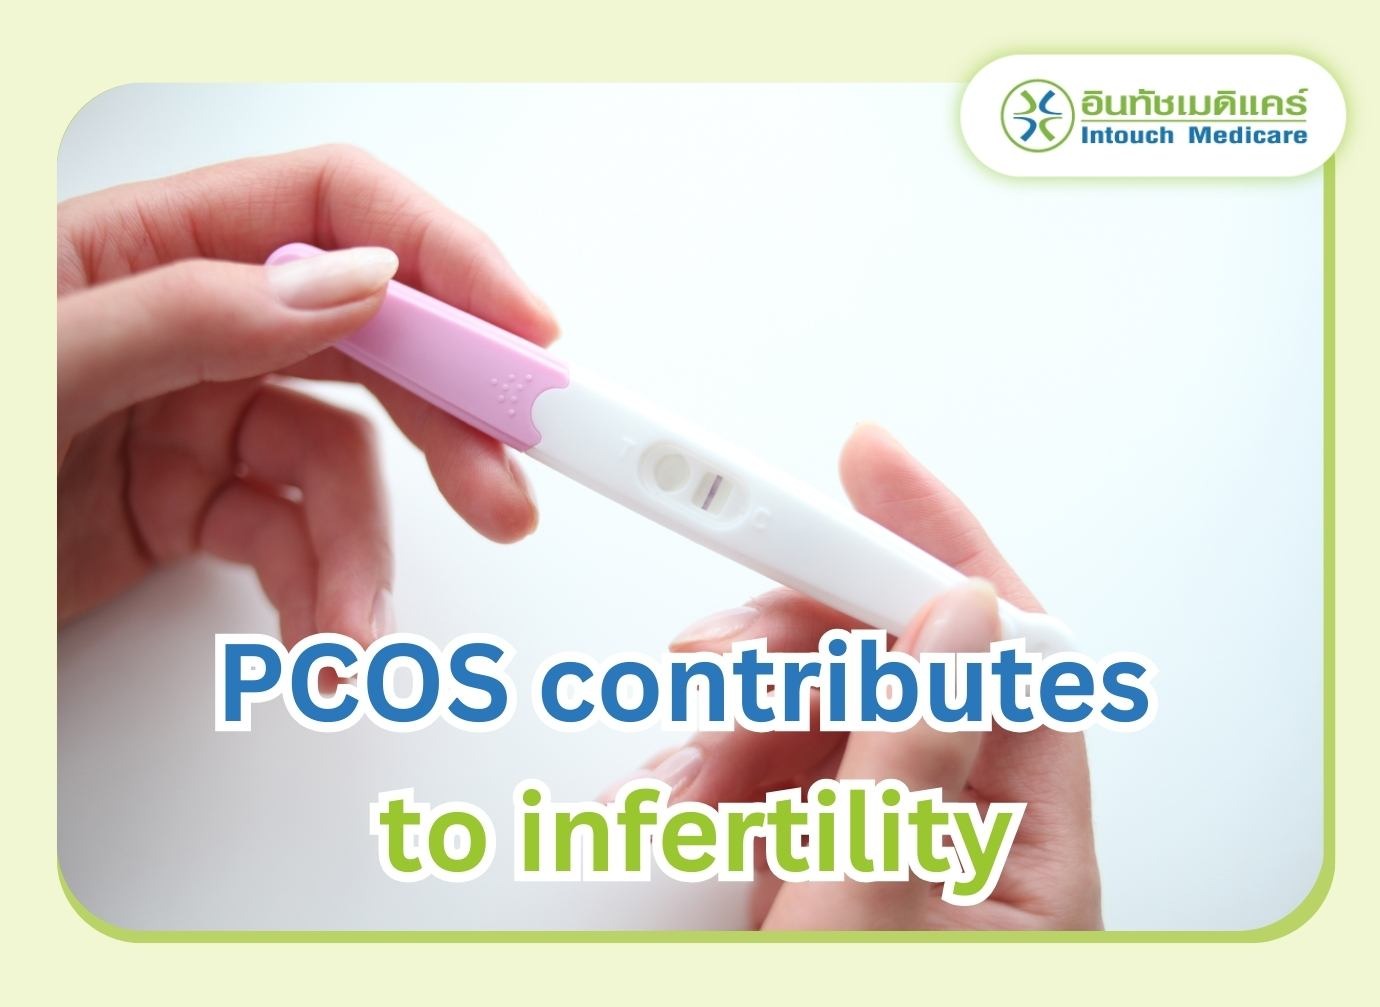 PCOS contributes to infertility